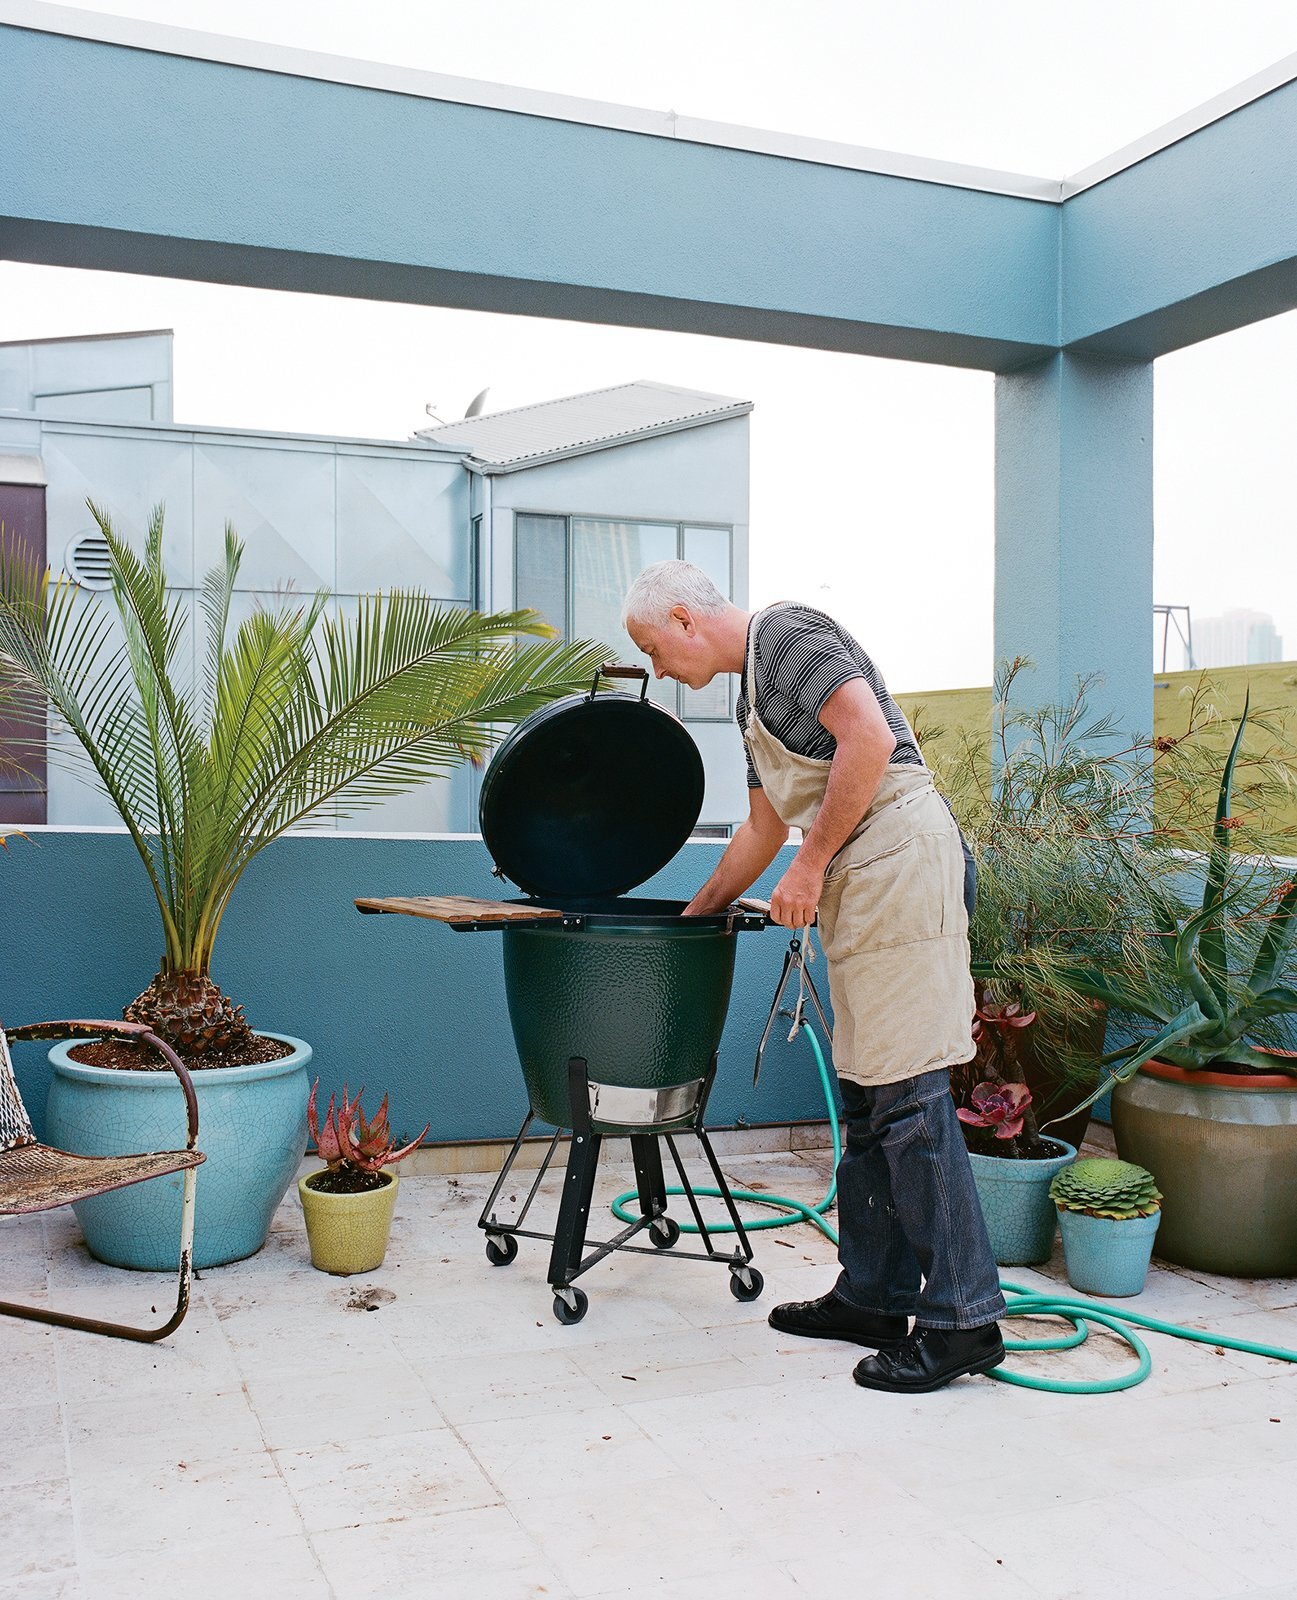 michael-tends-to-his-capons-in-a-big-green-egg.jpg